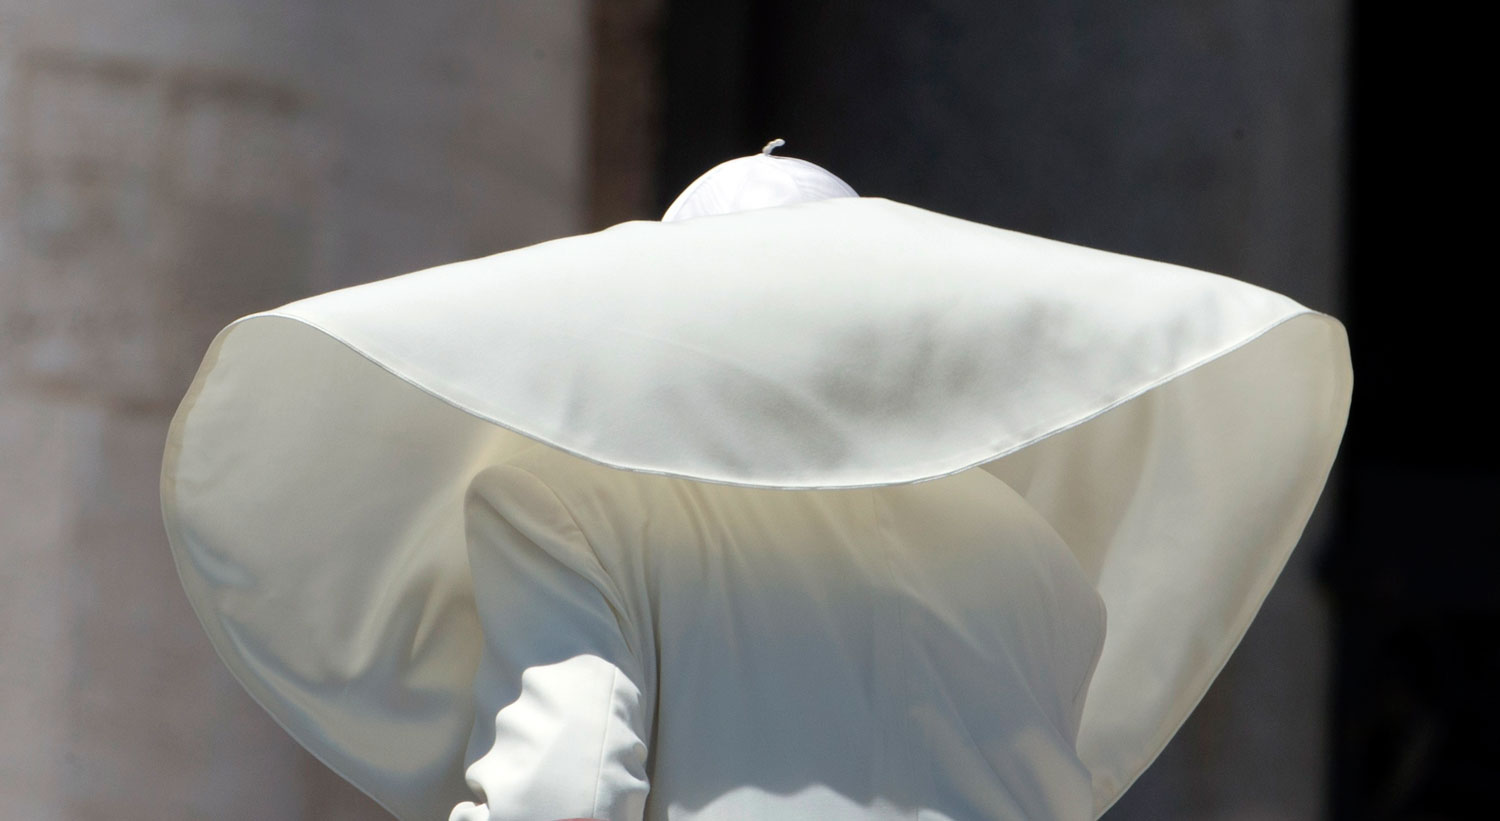 A gust of wind blows Pope Francis mantle as he  leaves St. Peter's square at the Vatican after his weekly general audience Wednesday, June 12, 2013. (AP Photo/Alessandra Tarantino)